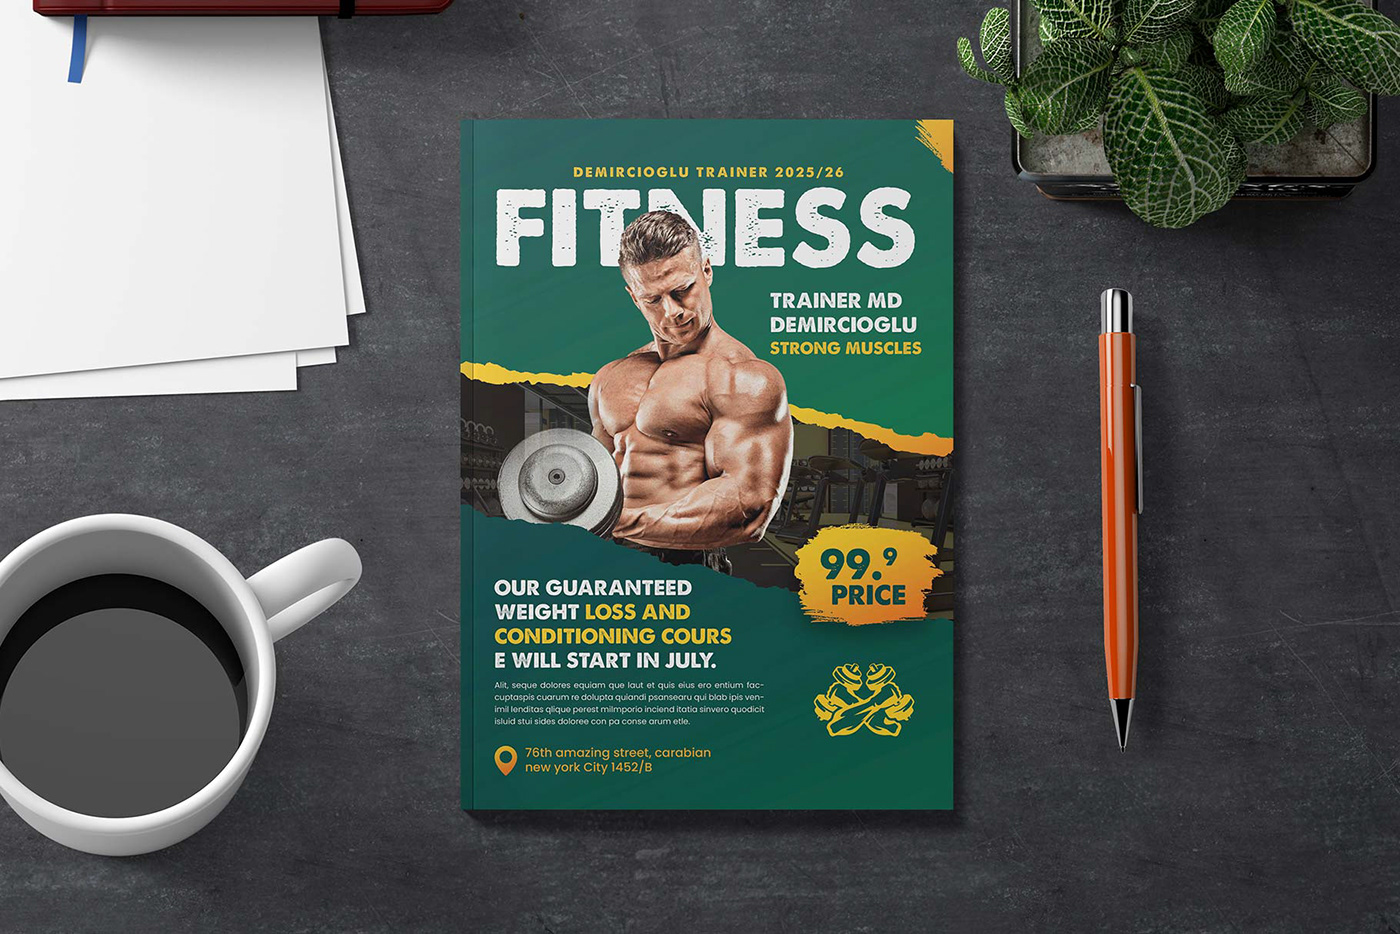 body Body Building body flyer template cardio Design Templates figure fitness flyer Flyer A4 graphicriver